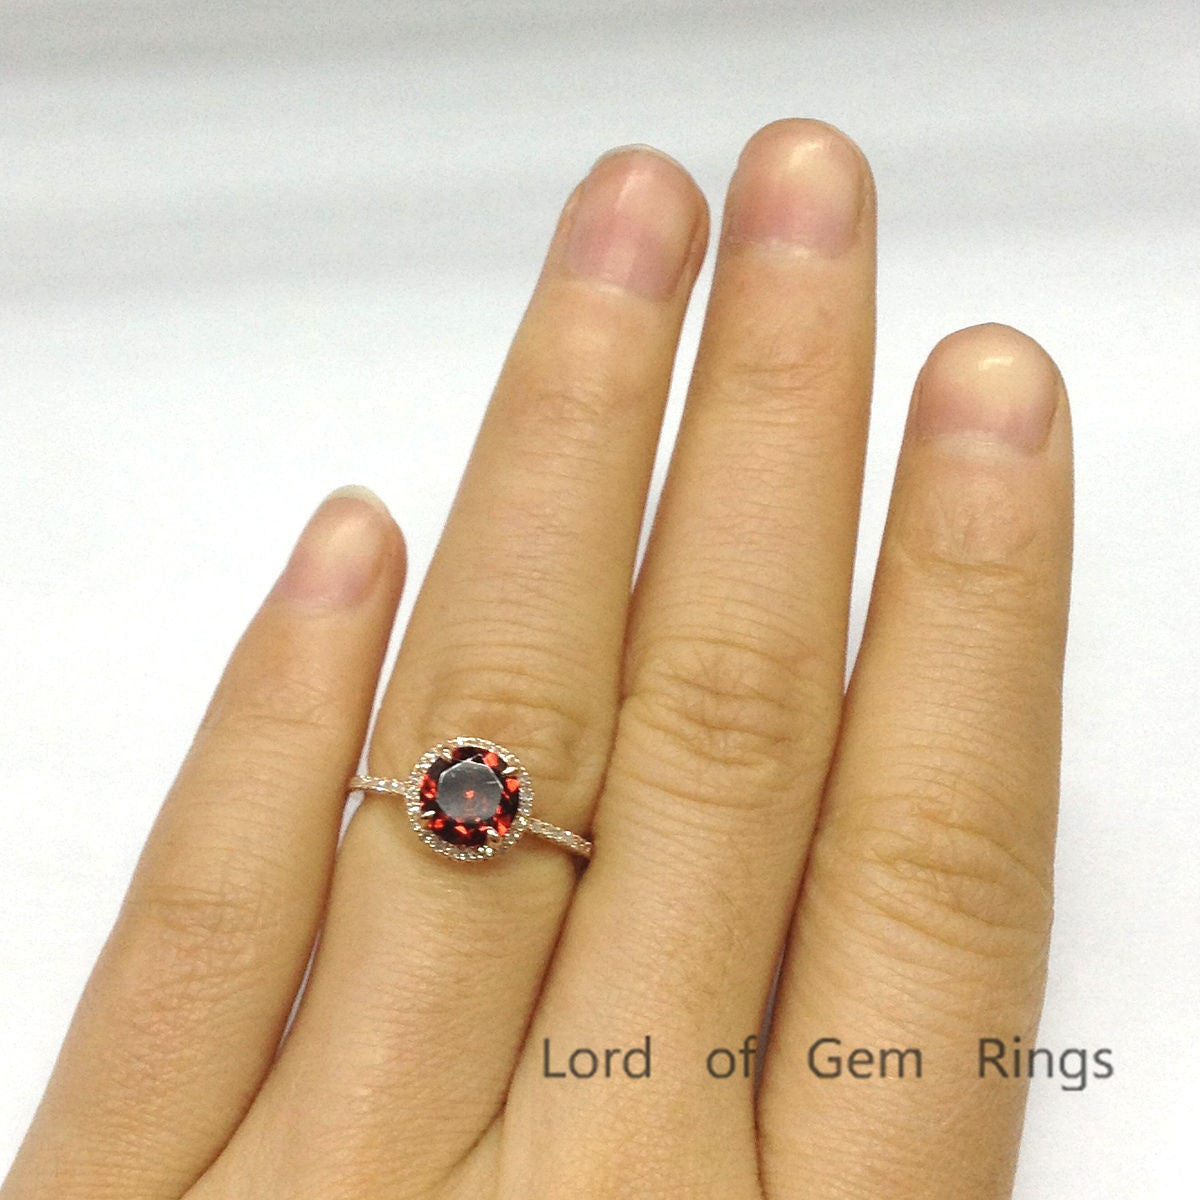 Round Garnet Engagement Ring Pave Diamond Wedding 14K Rose Gold 7mm Claw Prongs - Lord of Gem Rings - 4